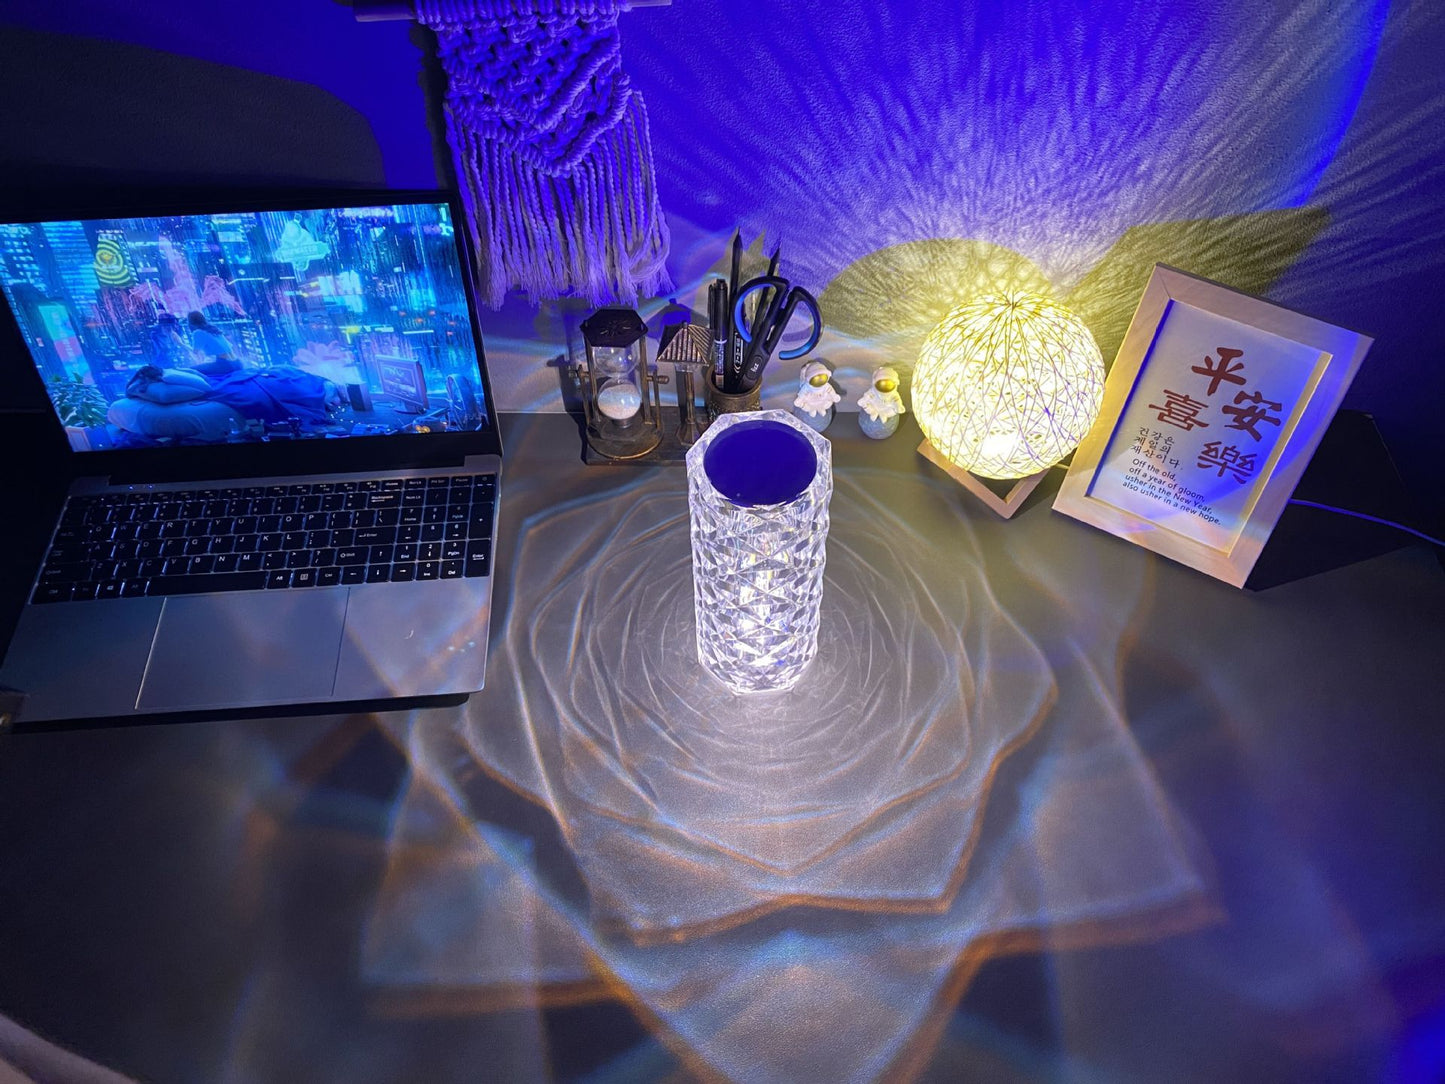 LED Table Lamps with Romantic Rose Diamond Design